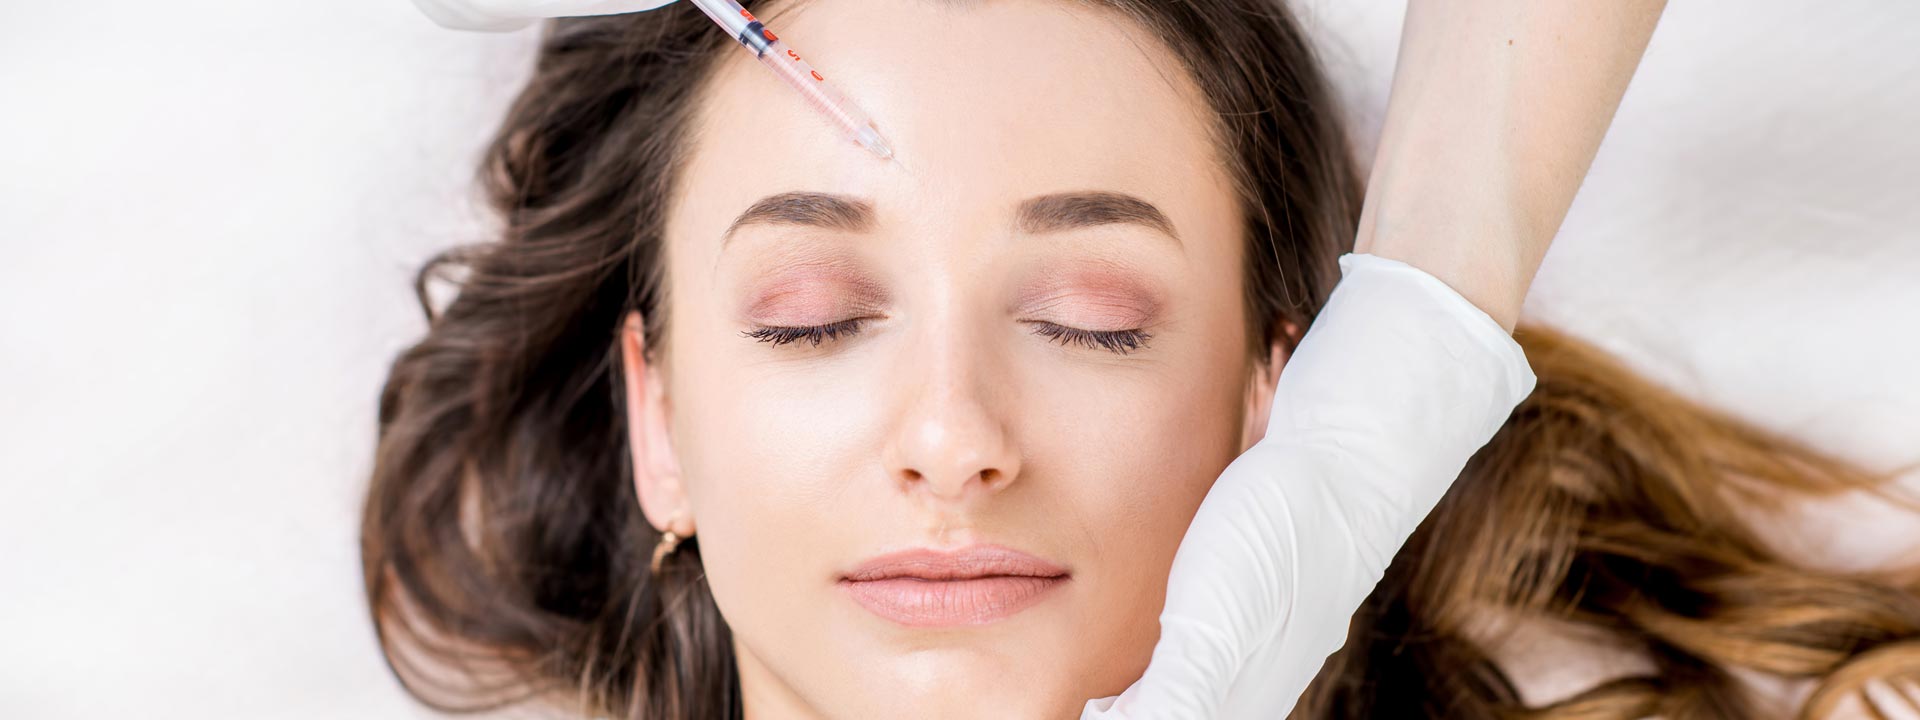 Woman getting restylane injection